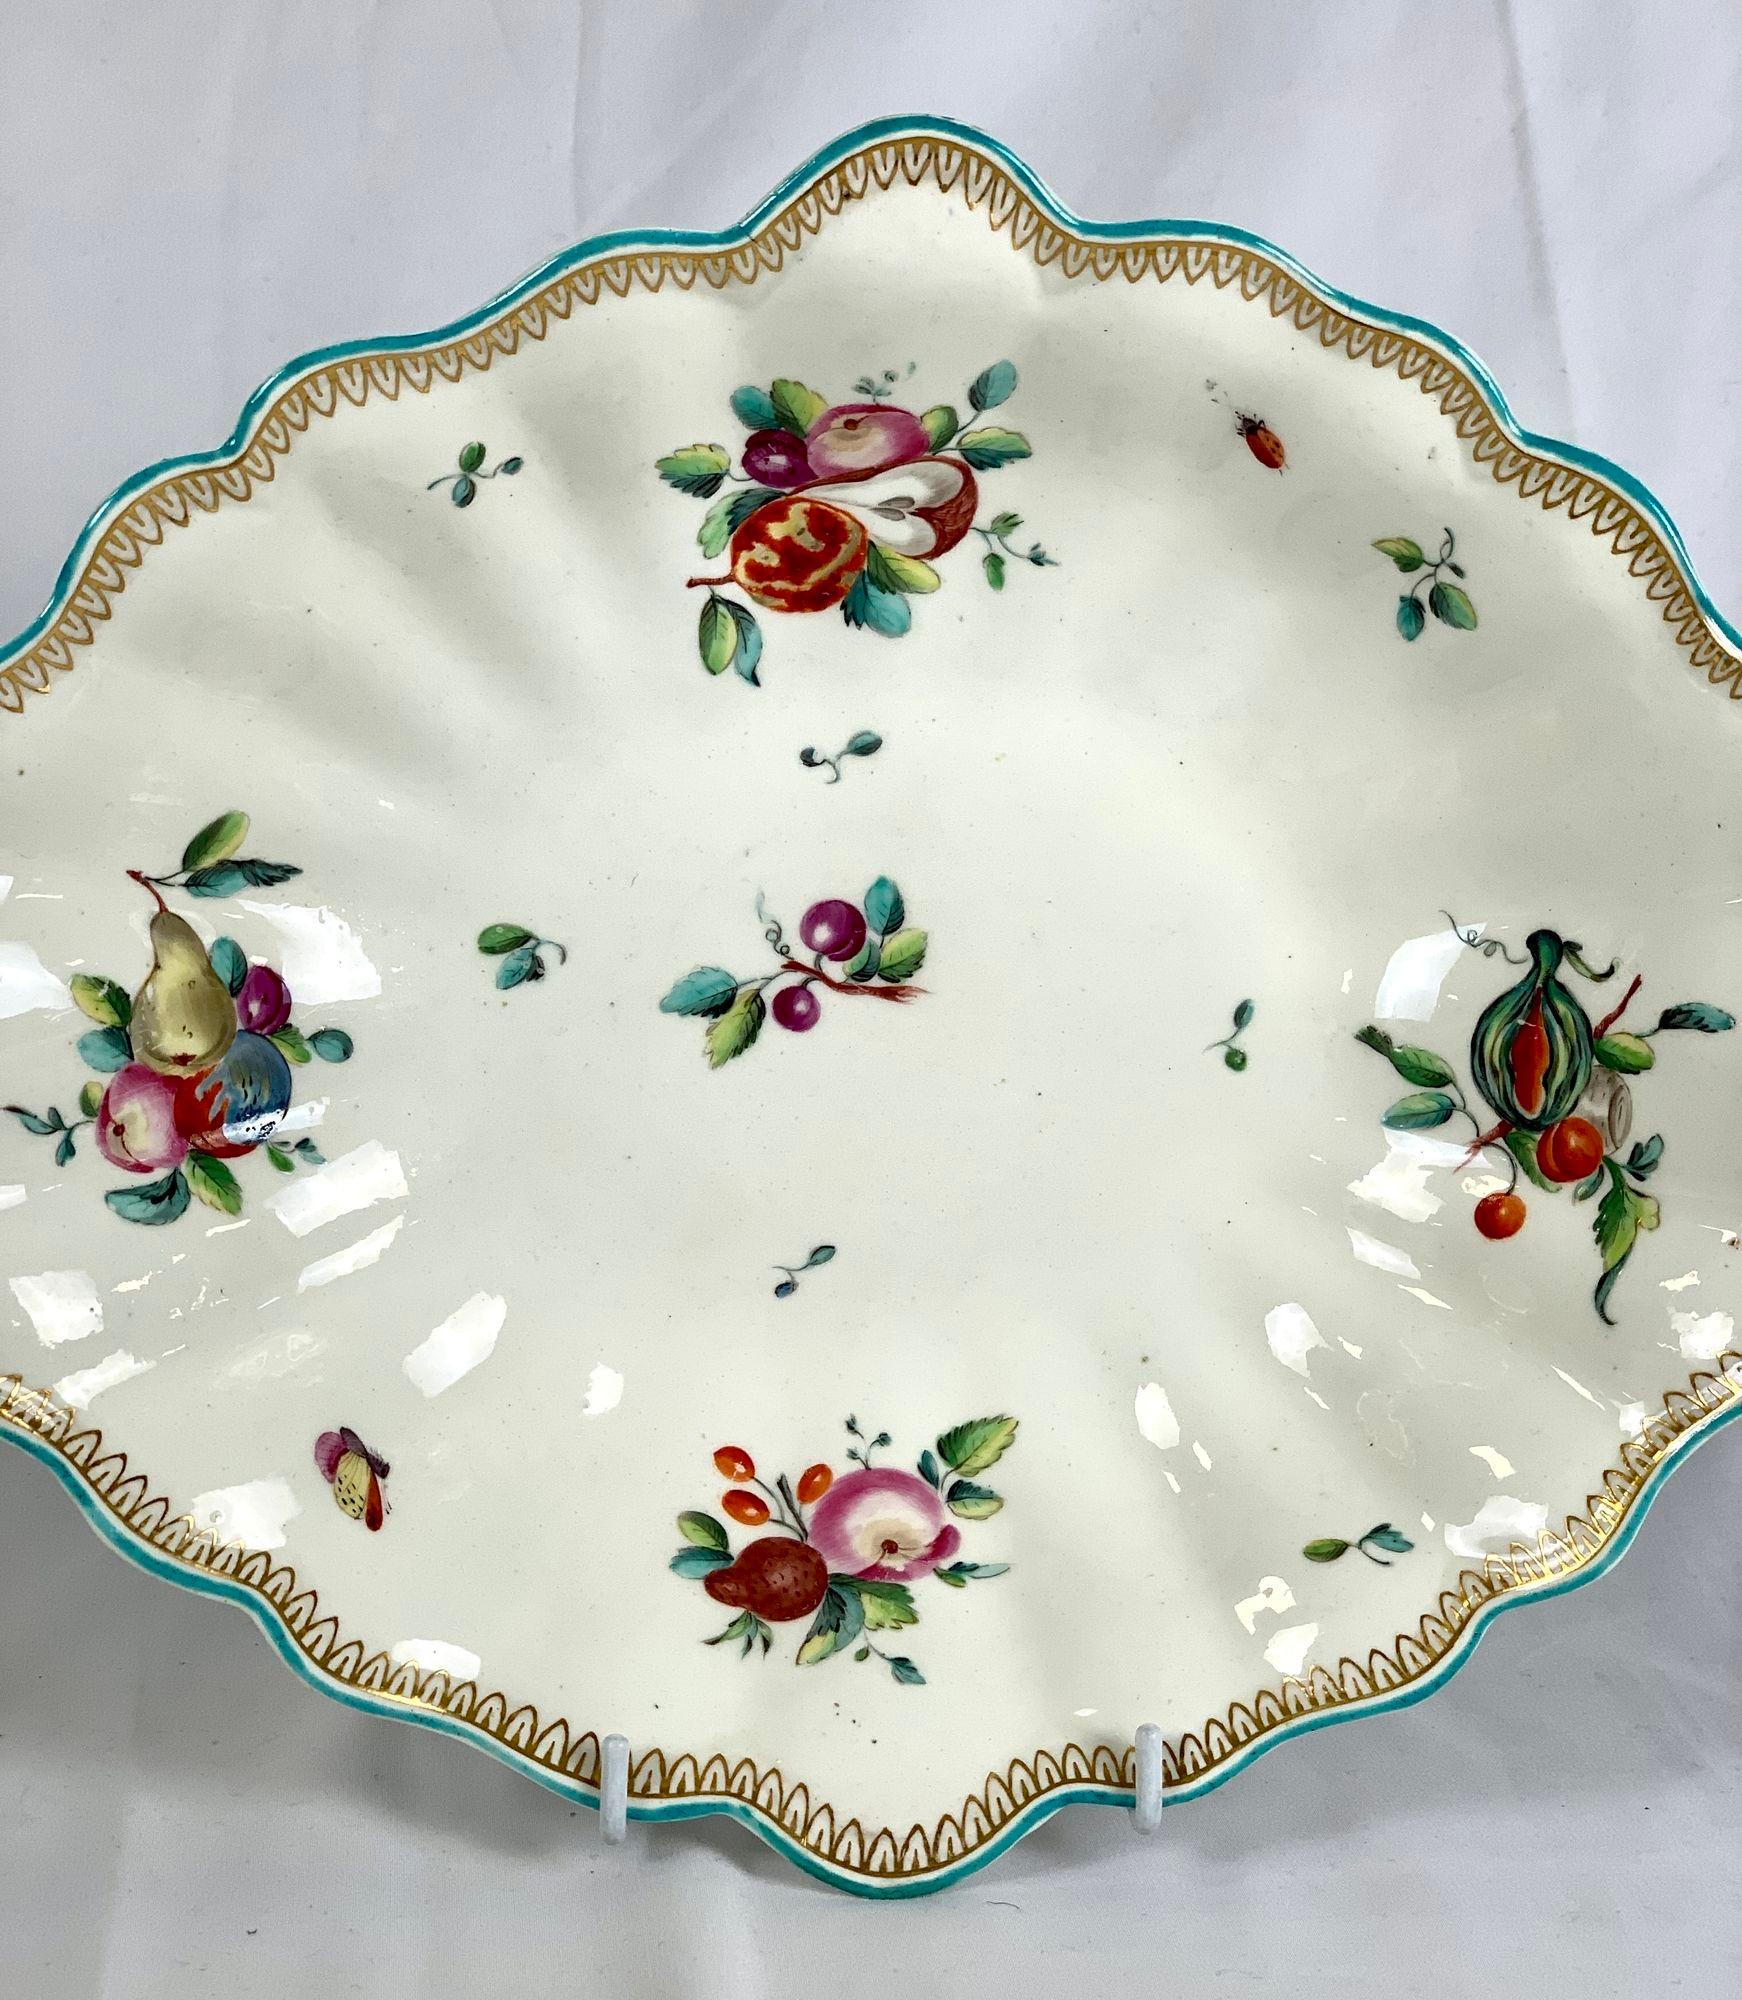 This gorgeous Chelsea Porcelain botanical dish was hand painted in England circa 1752-1756.
The polychrome enamels depict fruits: apples, pears, plums, melons, and, in the center, a delightful pair of cherries.
Four generous fruit clusters encircle